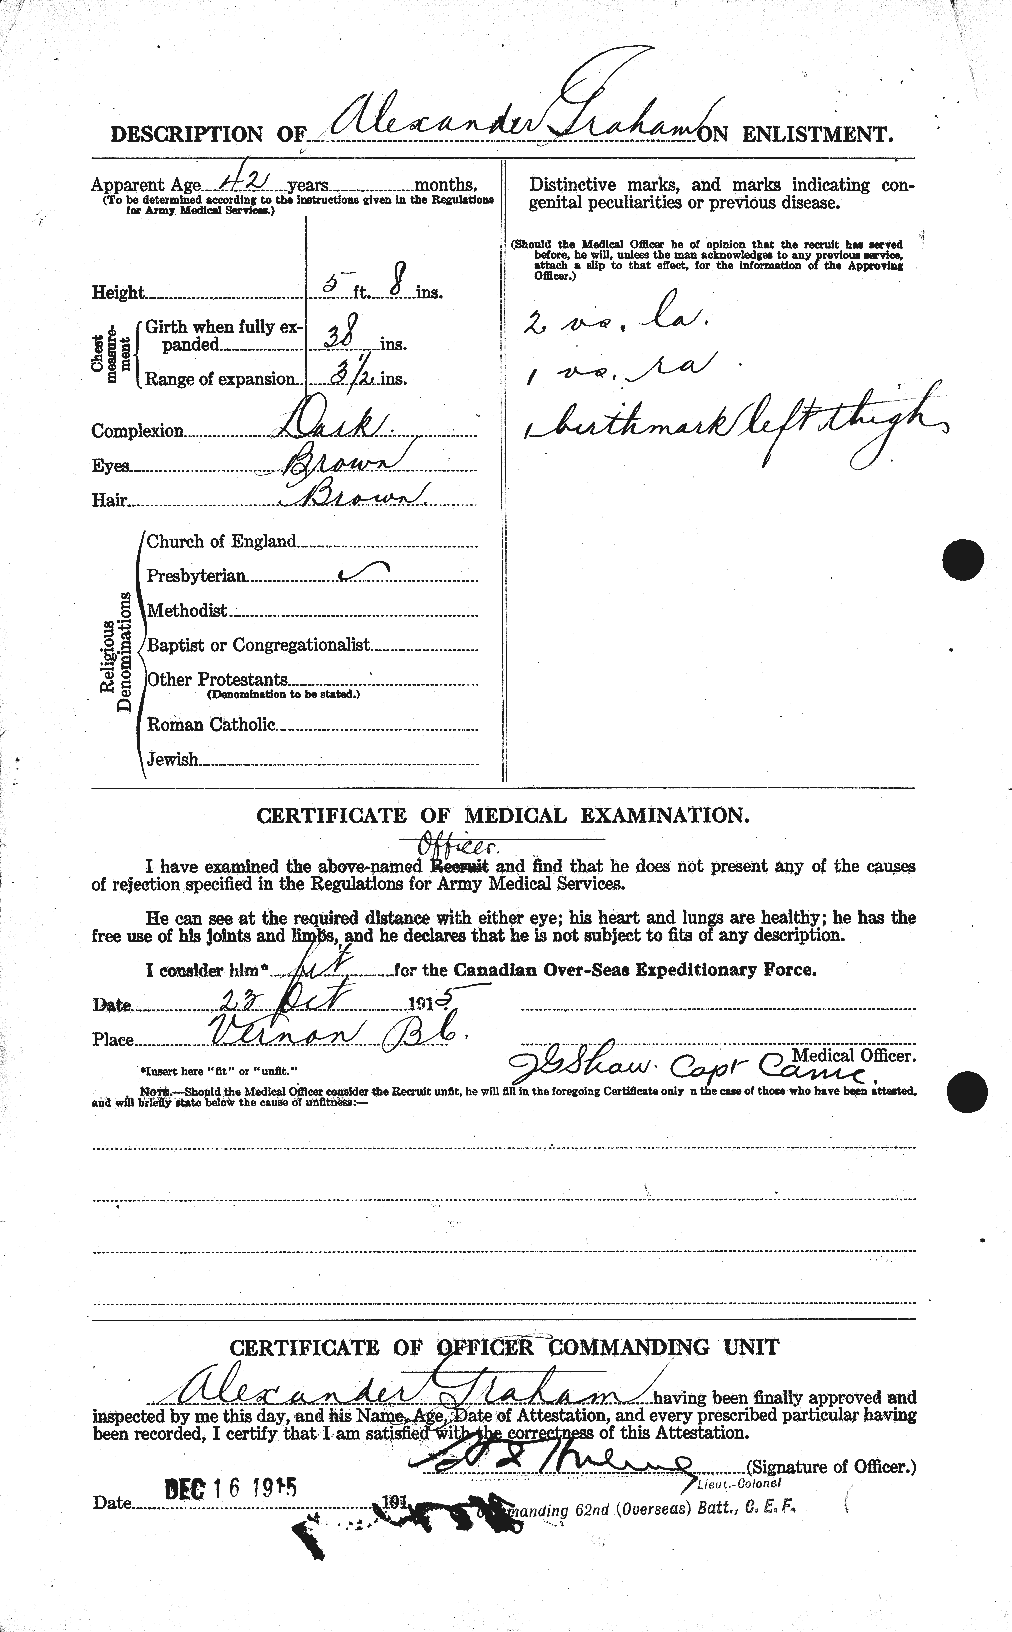 Personnel Records of the First World War - CEF 359575b